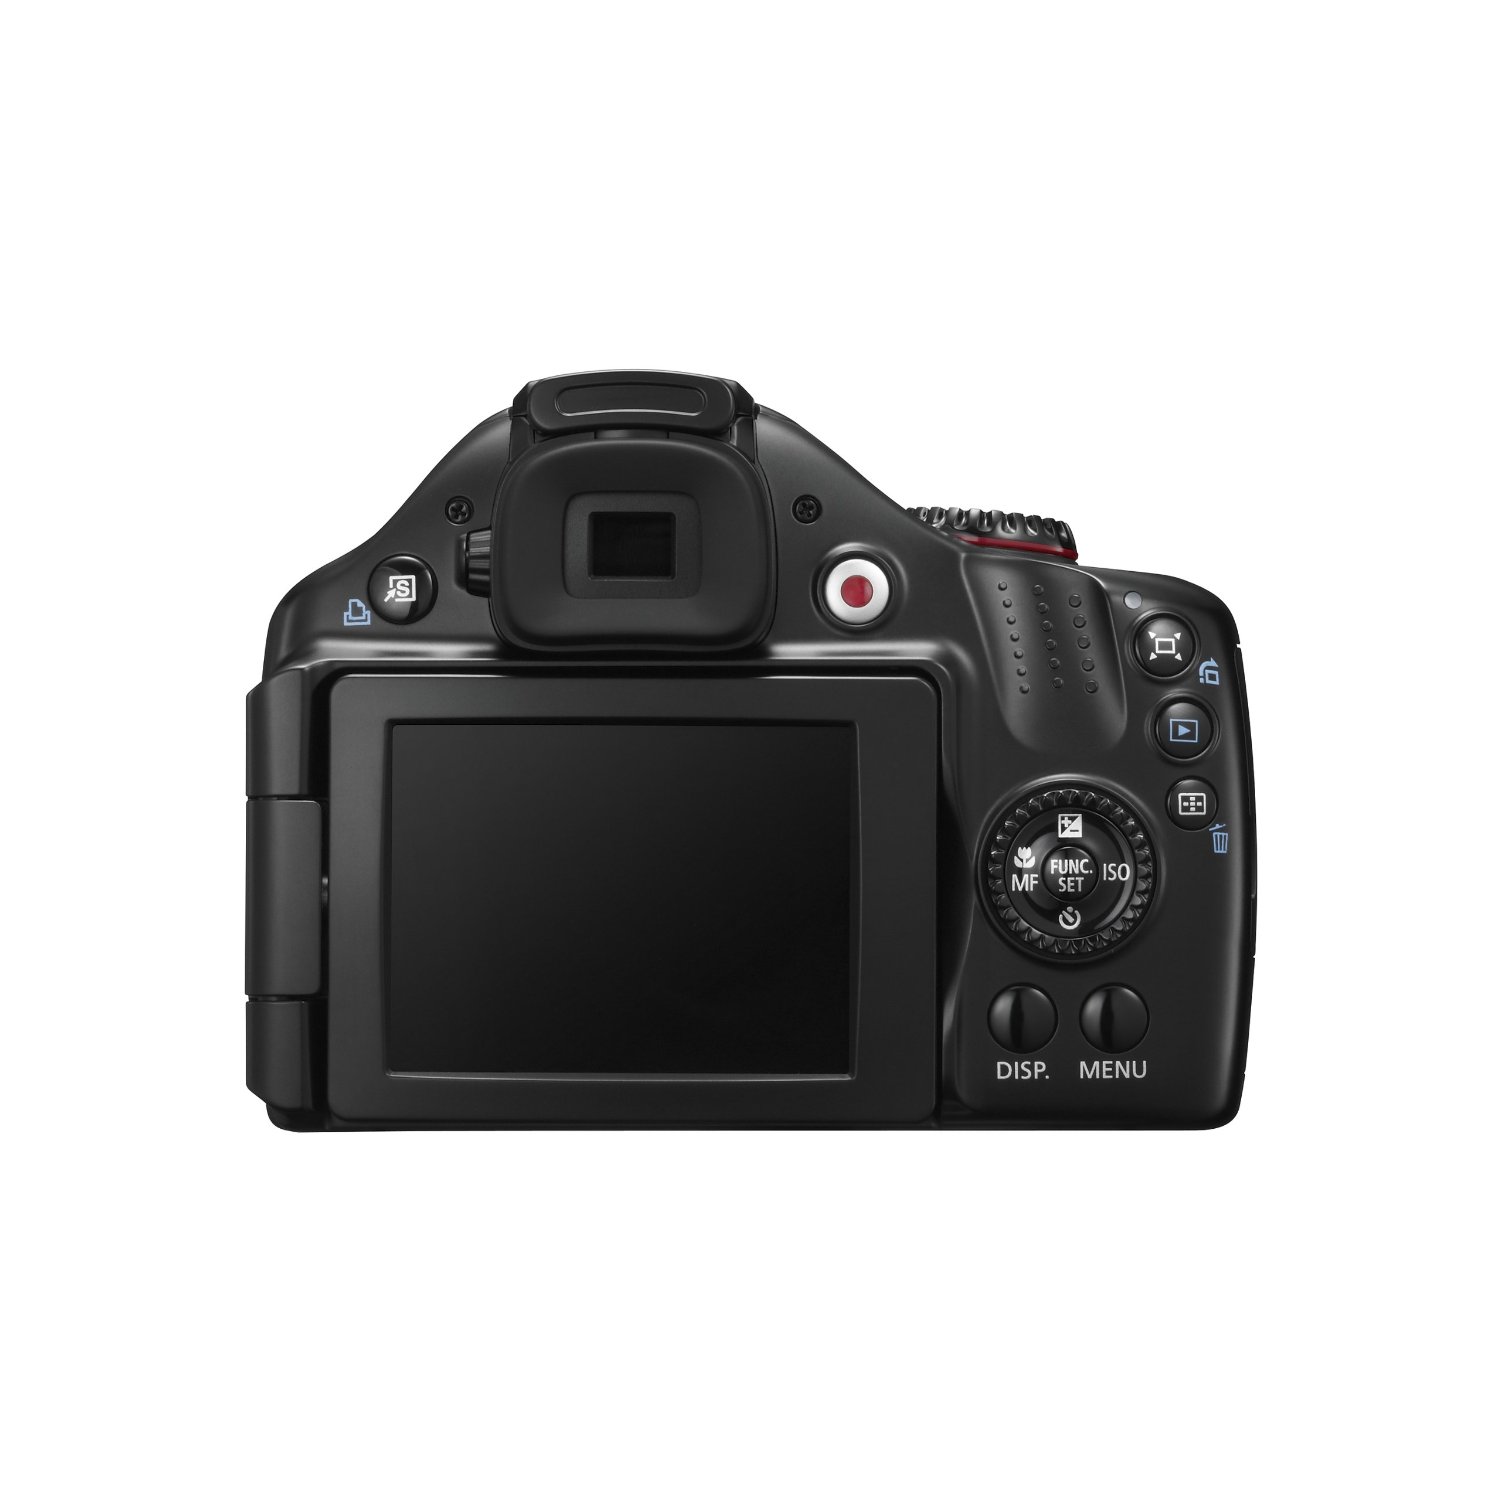 http://thetechjournal.com/wp-content/uploads/images/1110/1319693952-canons-new-sx40-hs-121mp-digital-camera-10.jpg